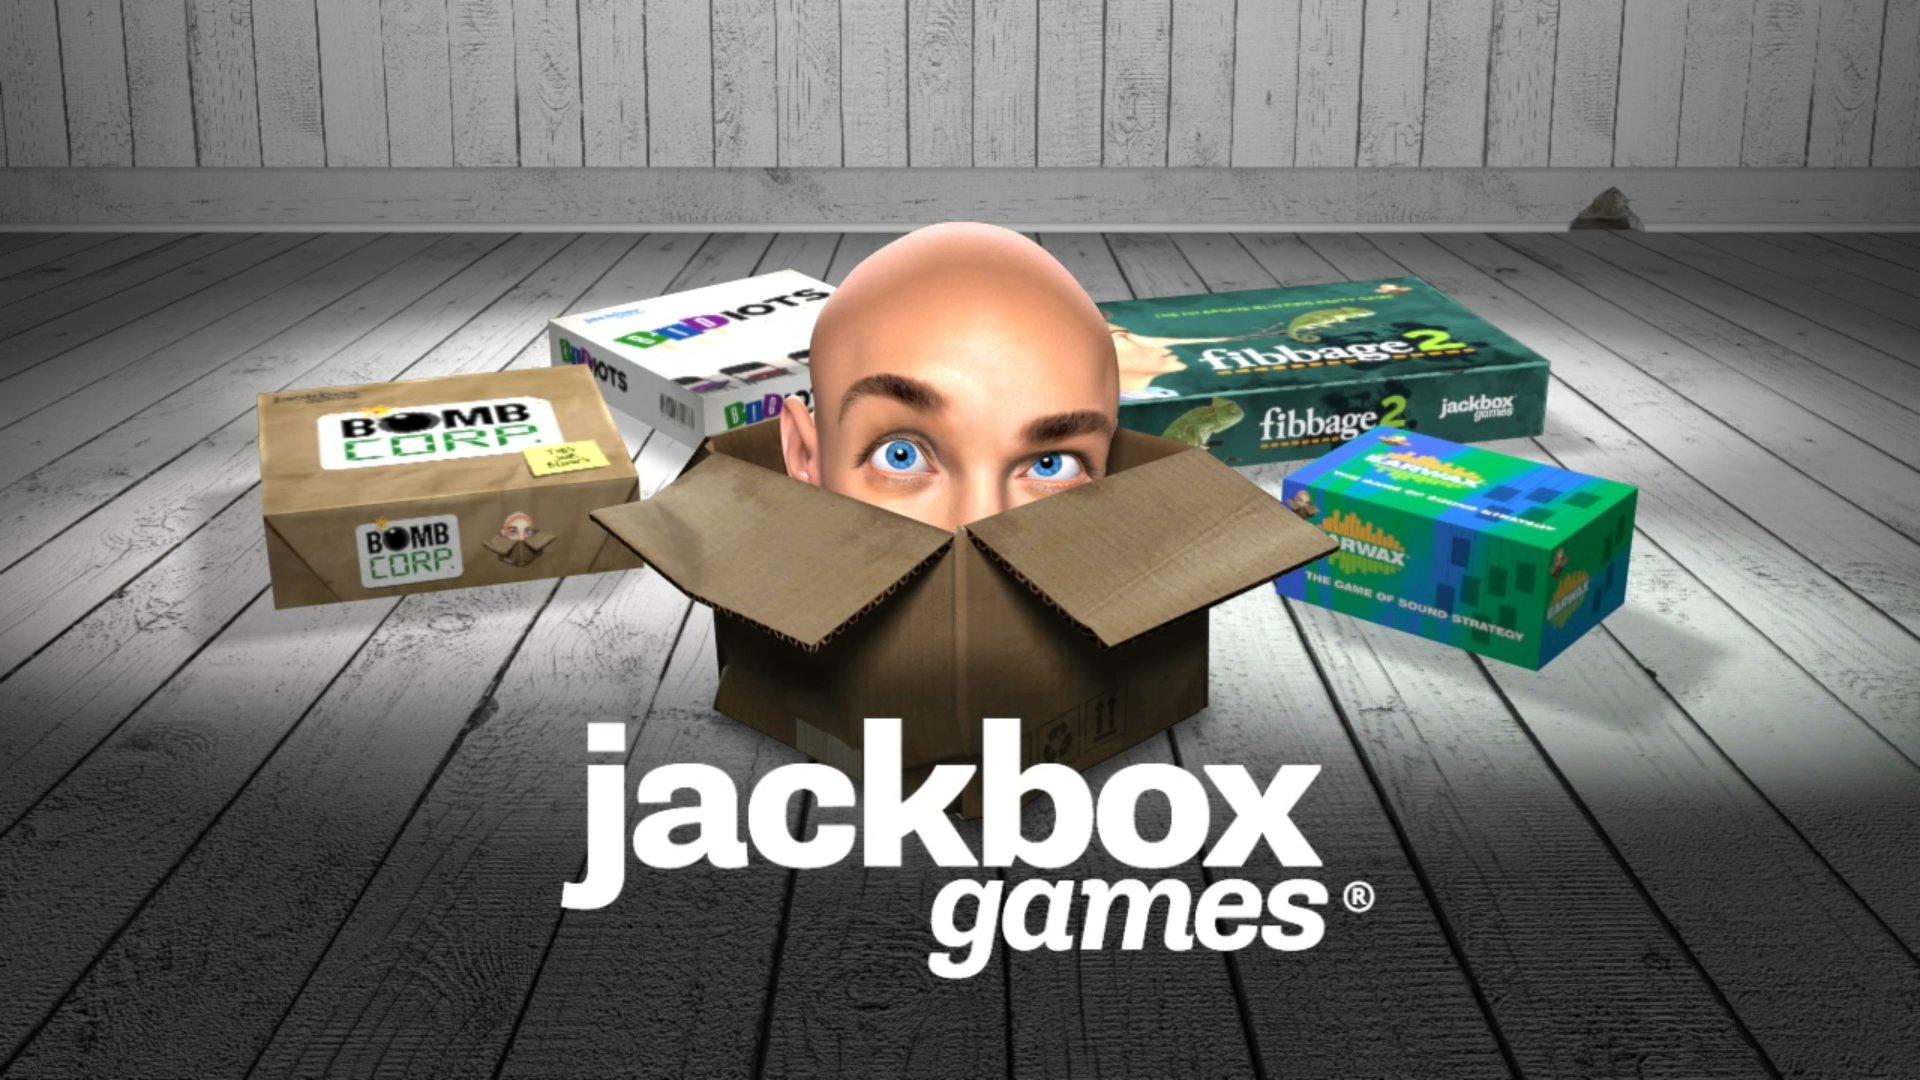 Seven hours of the Jackbox Party Packs